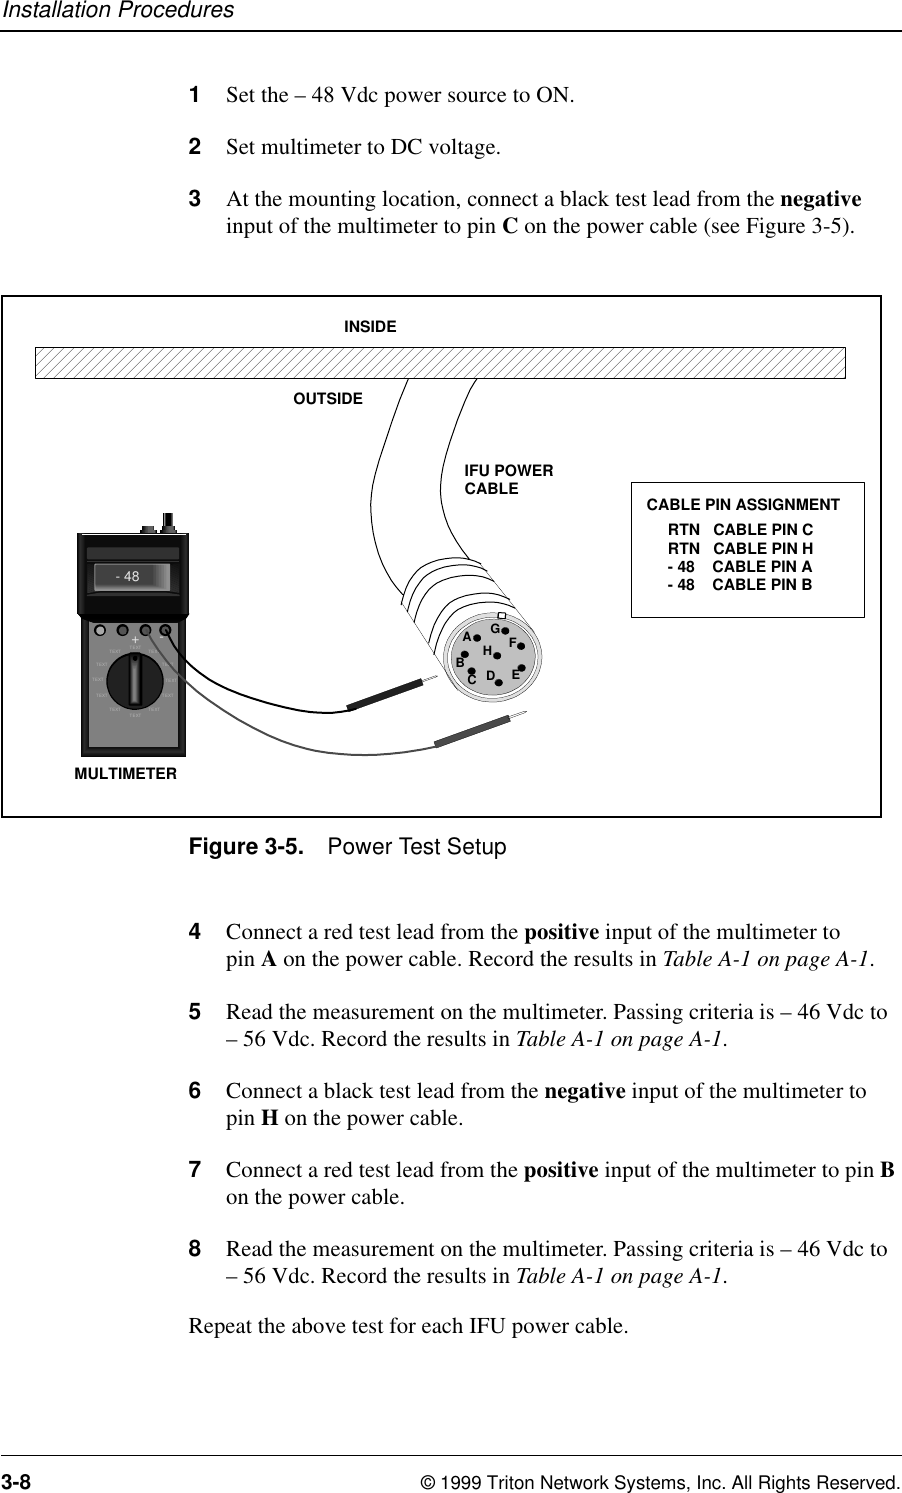 Installation Procedures3-8 © 1999 Triton Network Systems, Inc. All Rights Reserved.1Set the – 48 Vdc power source to ON.2Set multimeter to DC voltage.3At the mounting location, connect a black test lead from the negative input of the multimeter to pin C on the power cable (see Figure 3-5).Figure 3-5. Power Test Setup4Connect a red test lead from the positive input of the multimeter to pin A on the power cable. Record the results in Table A-1 on page A-1.5Read the measurement on the multimeter. Passing criteria is – 46 Vdc to – 56 Vdc. Record the results in Table A-1 on page A-1.6Connect a black test lead from the negative input of the multimeter to pin H on the power cable.7Connect a red test lead from the positive input of the multimeter to pin B on the power cable.8Read the measurement on the multimeter. Passing criteria is – 46 Vdc to – 56 Vdc. Record the results in Table A-1 on page A-1.Repeat the above test for each IFU power cable.OUTSIDEINSIDEIFU POWERCABLERTN   CABLE PIN CRTN   CABLE PIN H- 48    CABLE PIN A- 48    CABLE PIN BCABLE PIN ASSIGNMENTAEDCBHGFTEXTTEXTTEXT TEXTTEXT TEXTTE XT T E XTTE XT T E XTTEXTTEXT- 48+- MULTIMETER